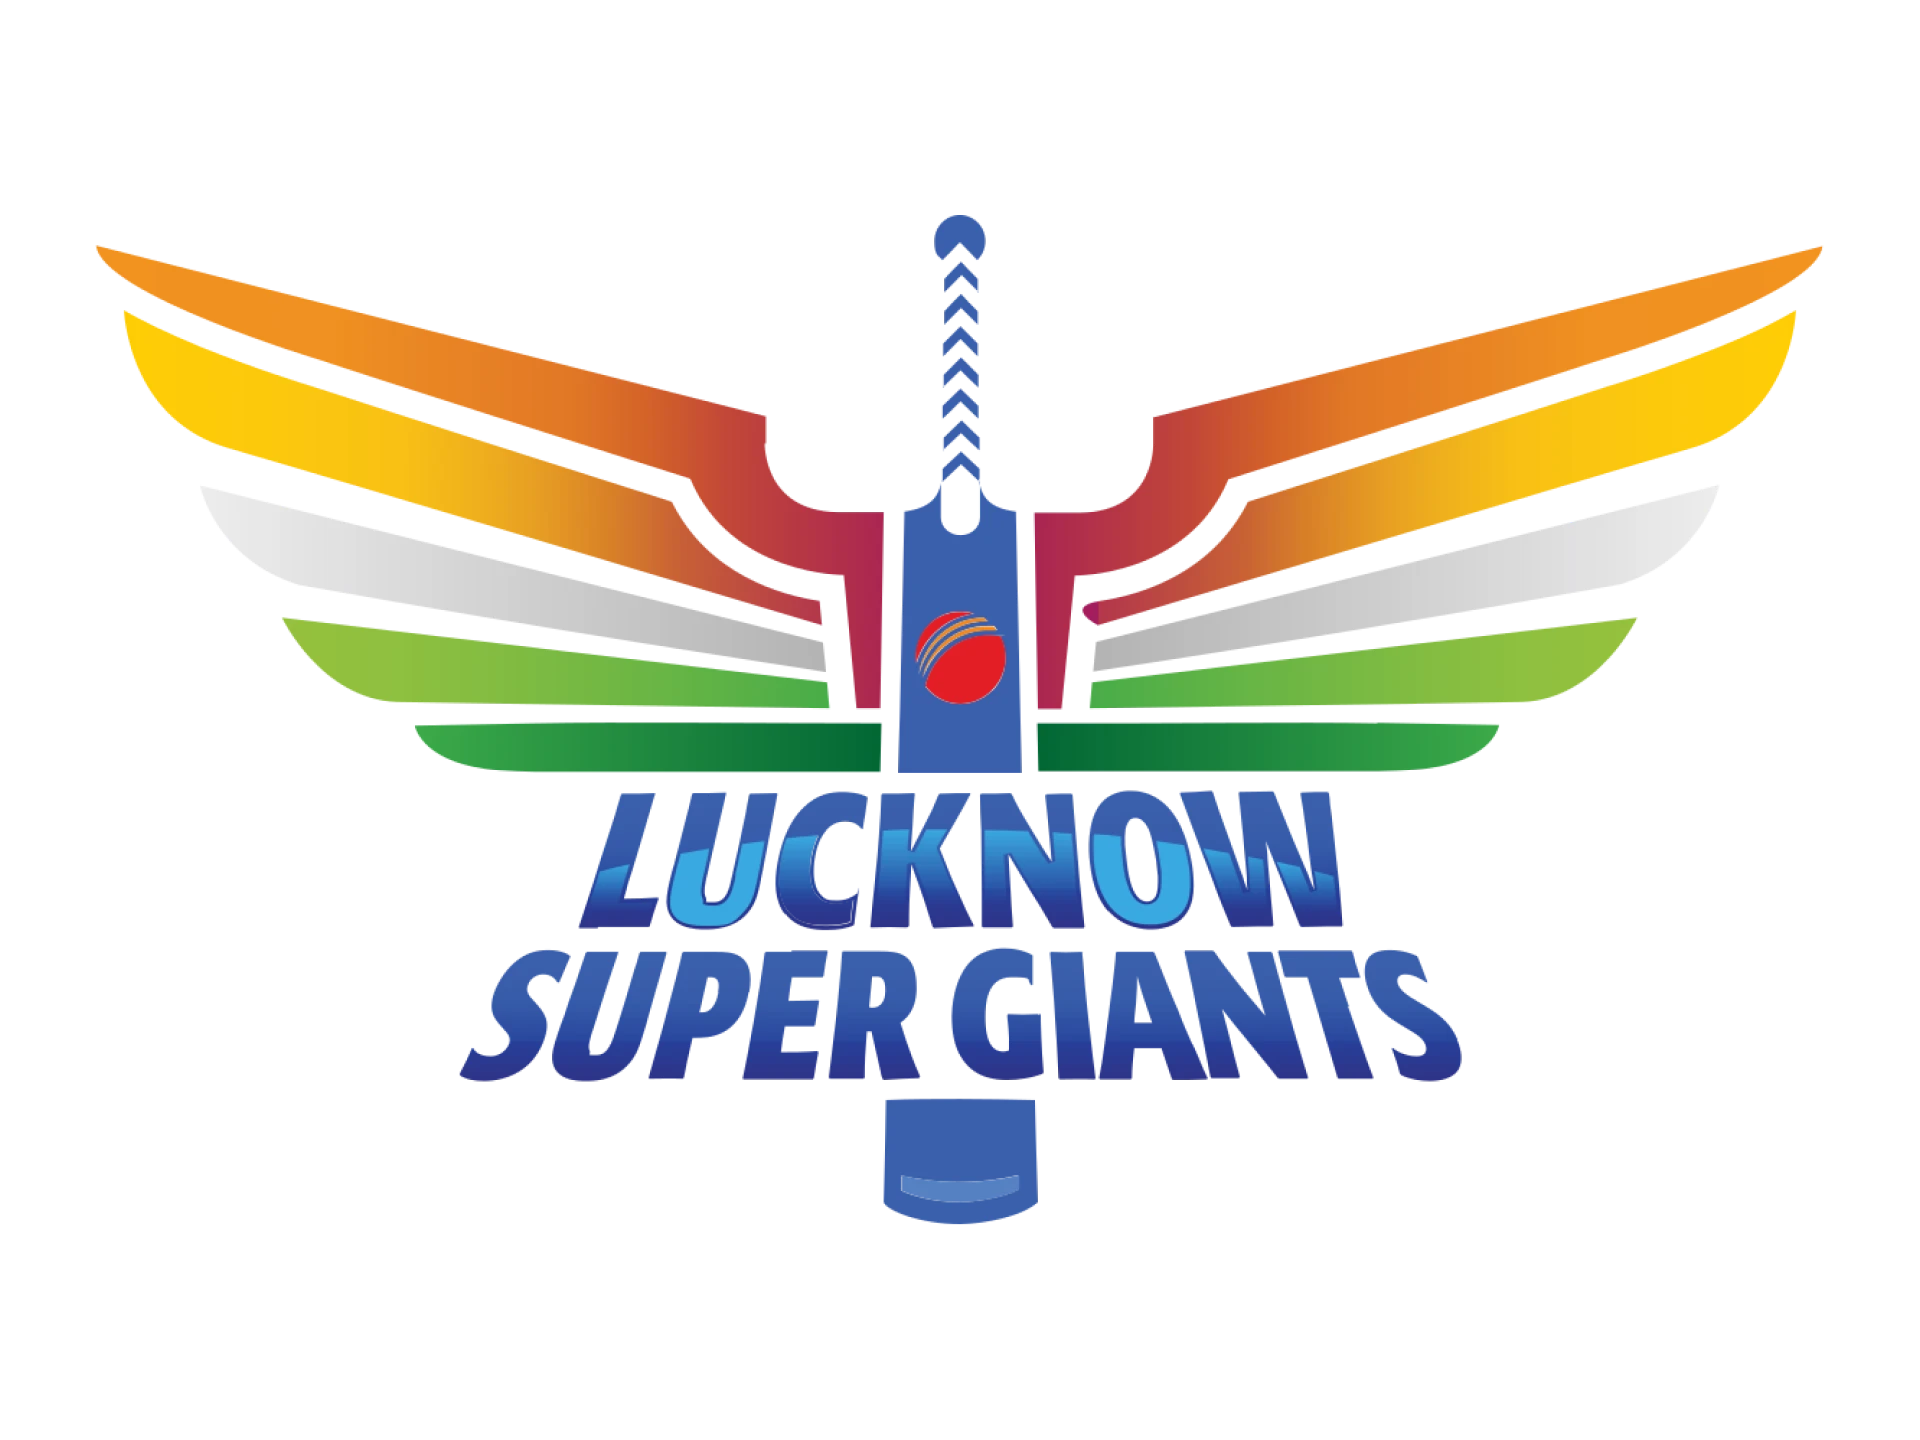 Lucknow Super Giants is the new team that will compete to win the IPL.